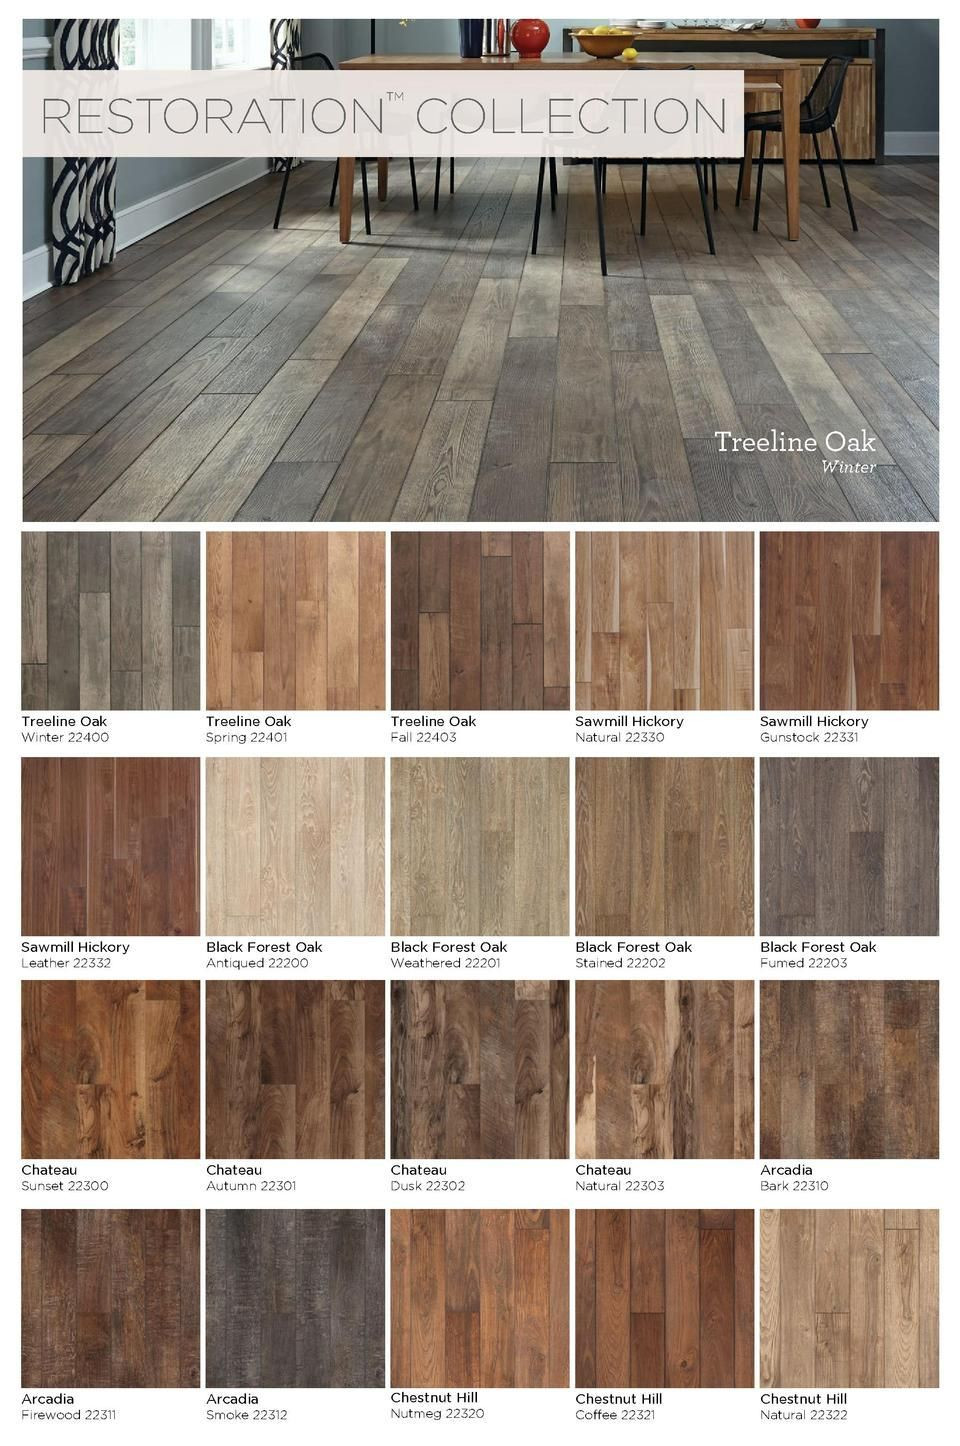 11 Wonderful Bruce Hardwood Flooring butterscotch Color 2024 free download bruce hardwood flooring butterscotch color of 40 multi colored wood laminate flooring images inside mannington offers quality laminate flooring in both hardwood and stone tile looks that wil